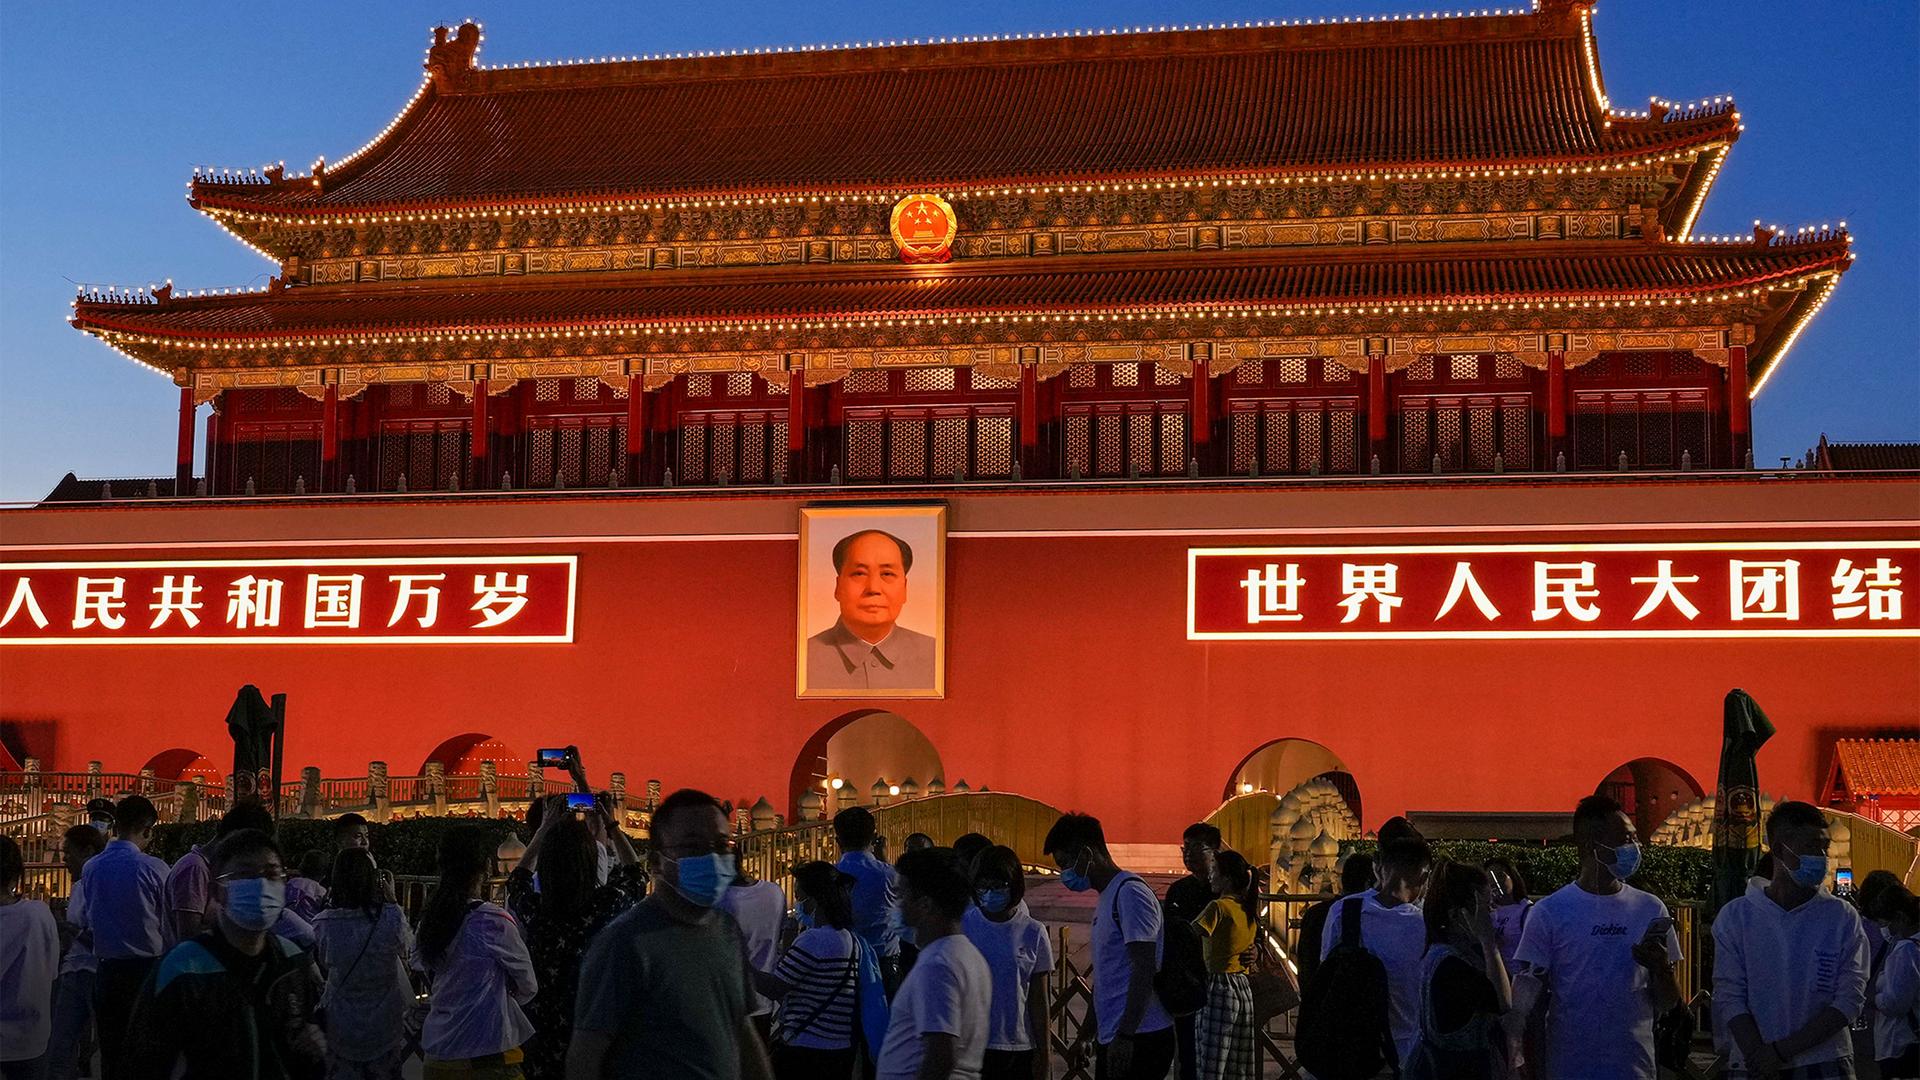 Red building in China with people in masks mingling in front of it